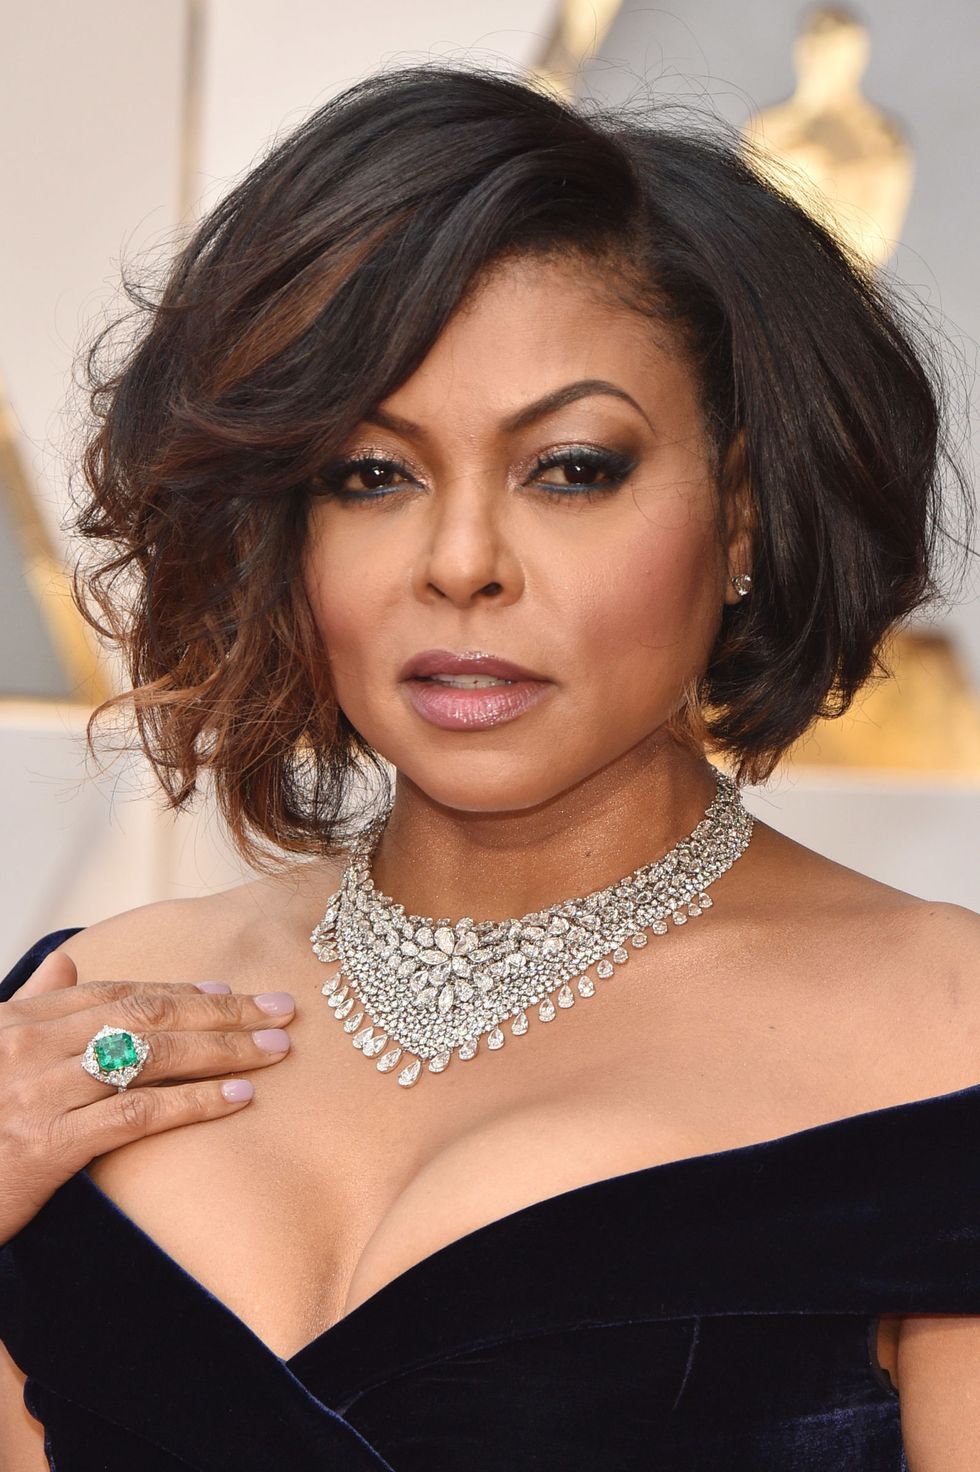 HOLLYWOOD, CA - FEBRUARY 26: Actor Taraji P. Henson attends the 89th Annual Academy Awards at Hollywood &amp; Highland Center on February 26, 2017 in Hollywood, California.  (Photo by Kevin Mazur/Getty Images)